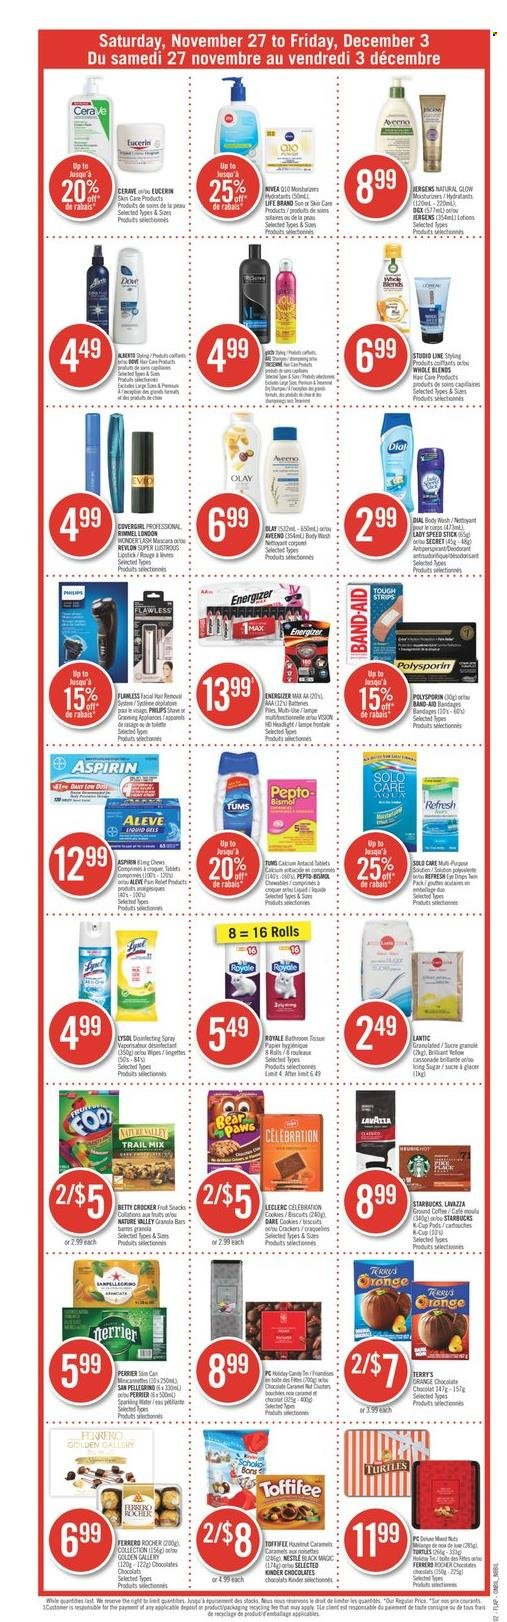 thumbnail - Shoppers Drug Mart Flyer - November 27, 2021 - December 03, 2021 - Sales products - cookies, chocolate, snack, Celebration, sugar, Nature Valley, trail mix, Perrier, San Pellegrino, Starbucks, Lavazza, body wash, CeraVe, Olay, Revlon, Speed Stick, Rimmel, Aleve, aspirin, Sol, band-aid, Energizer, Eucerin, Nivea, Ferrero Rocher. Page 4.